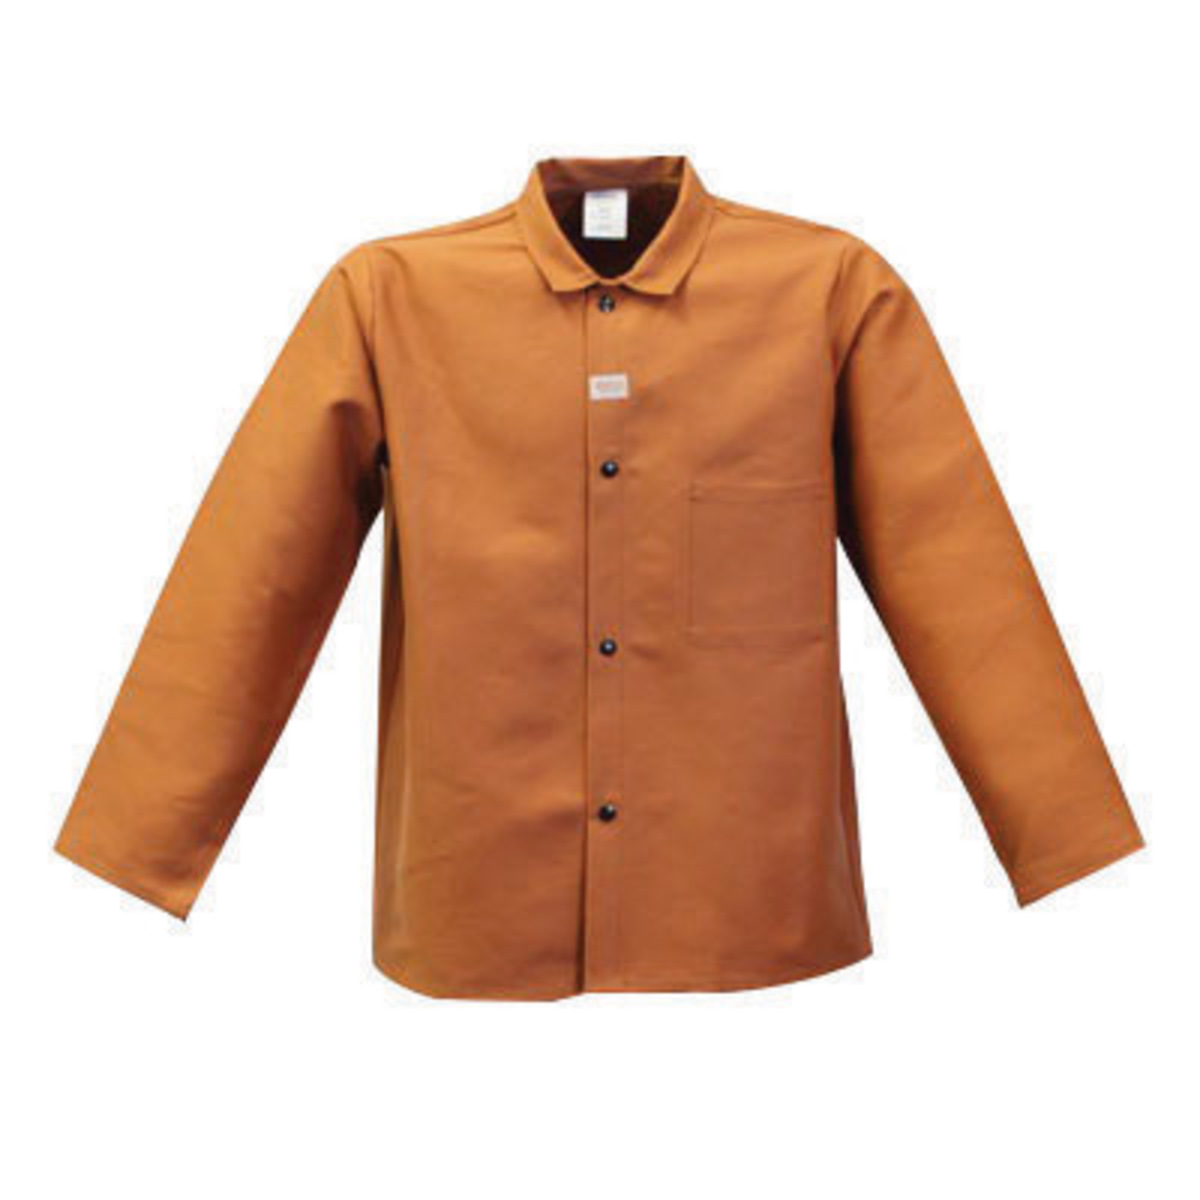 Stanco Safety Products™ Large Rust Brown Cotton Flame Resistant Welding Jacket With Snap Closure